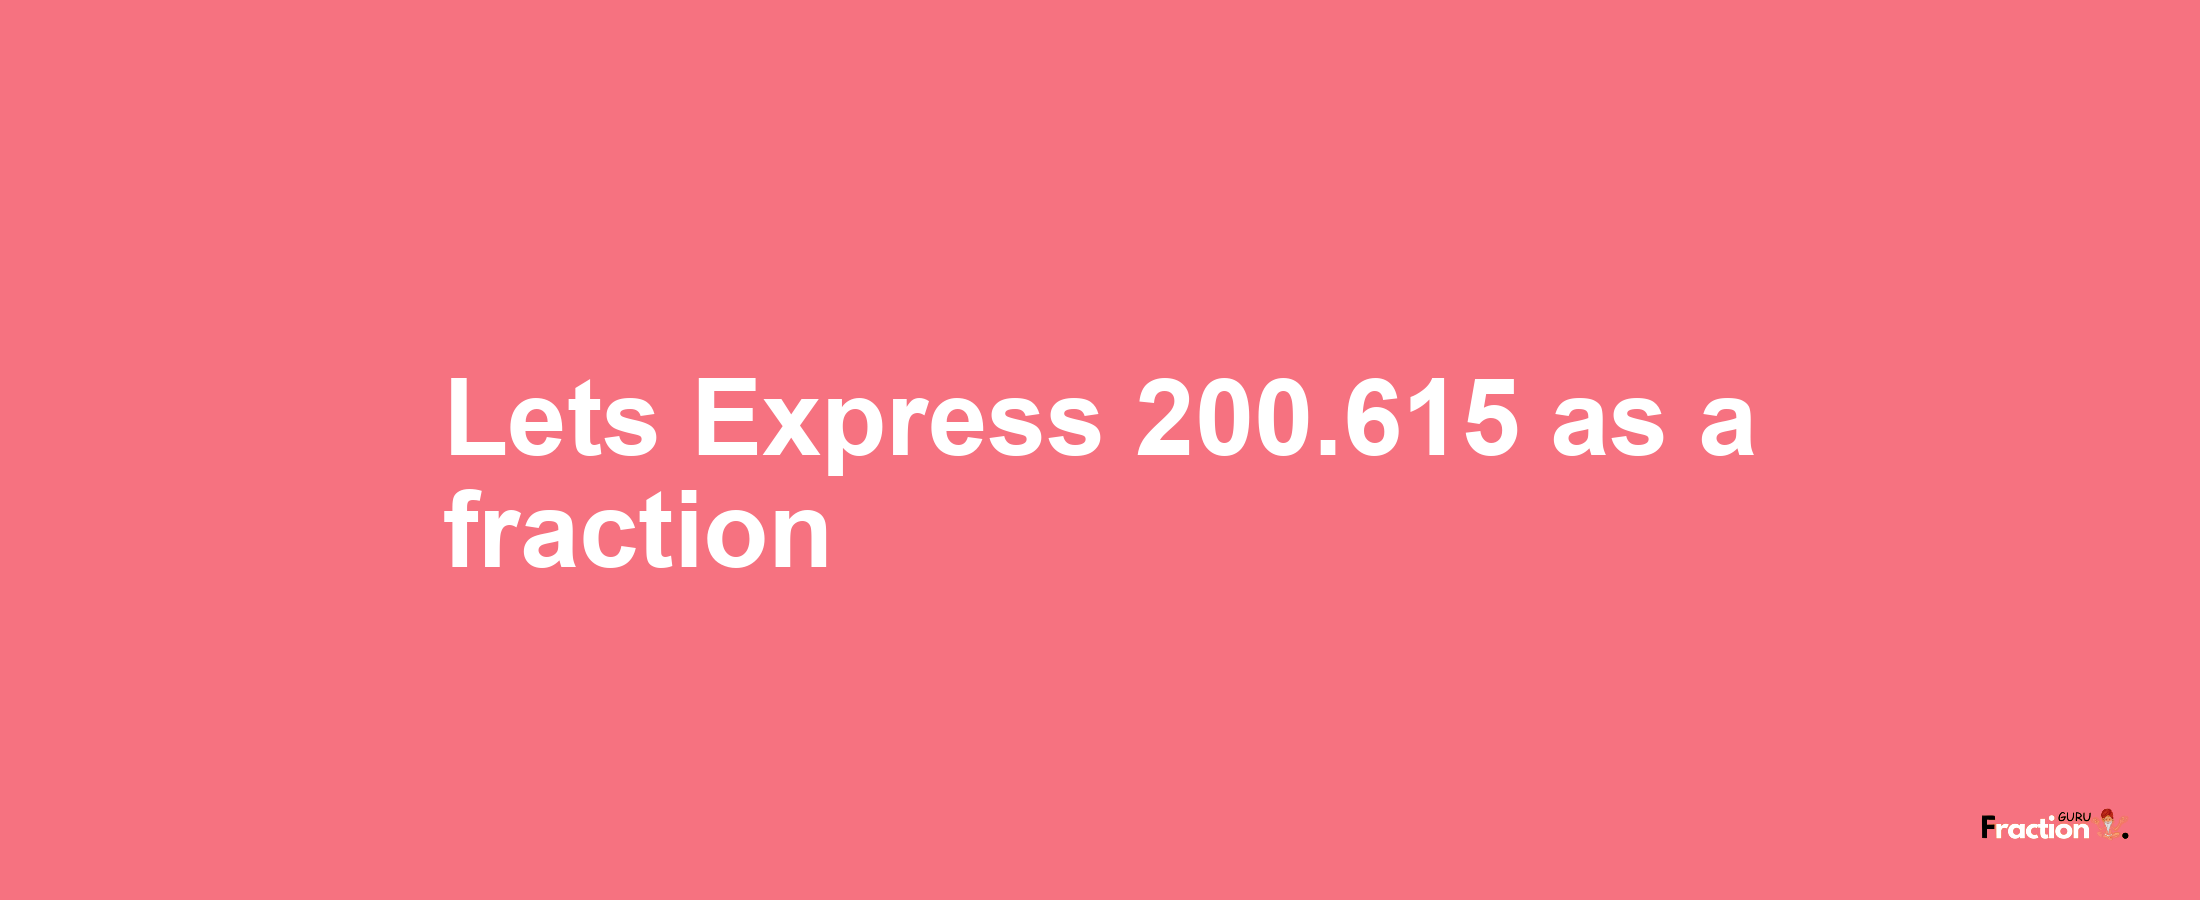 Lets Express 200.615 as afraction